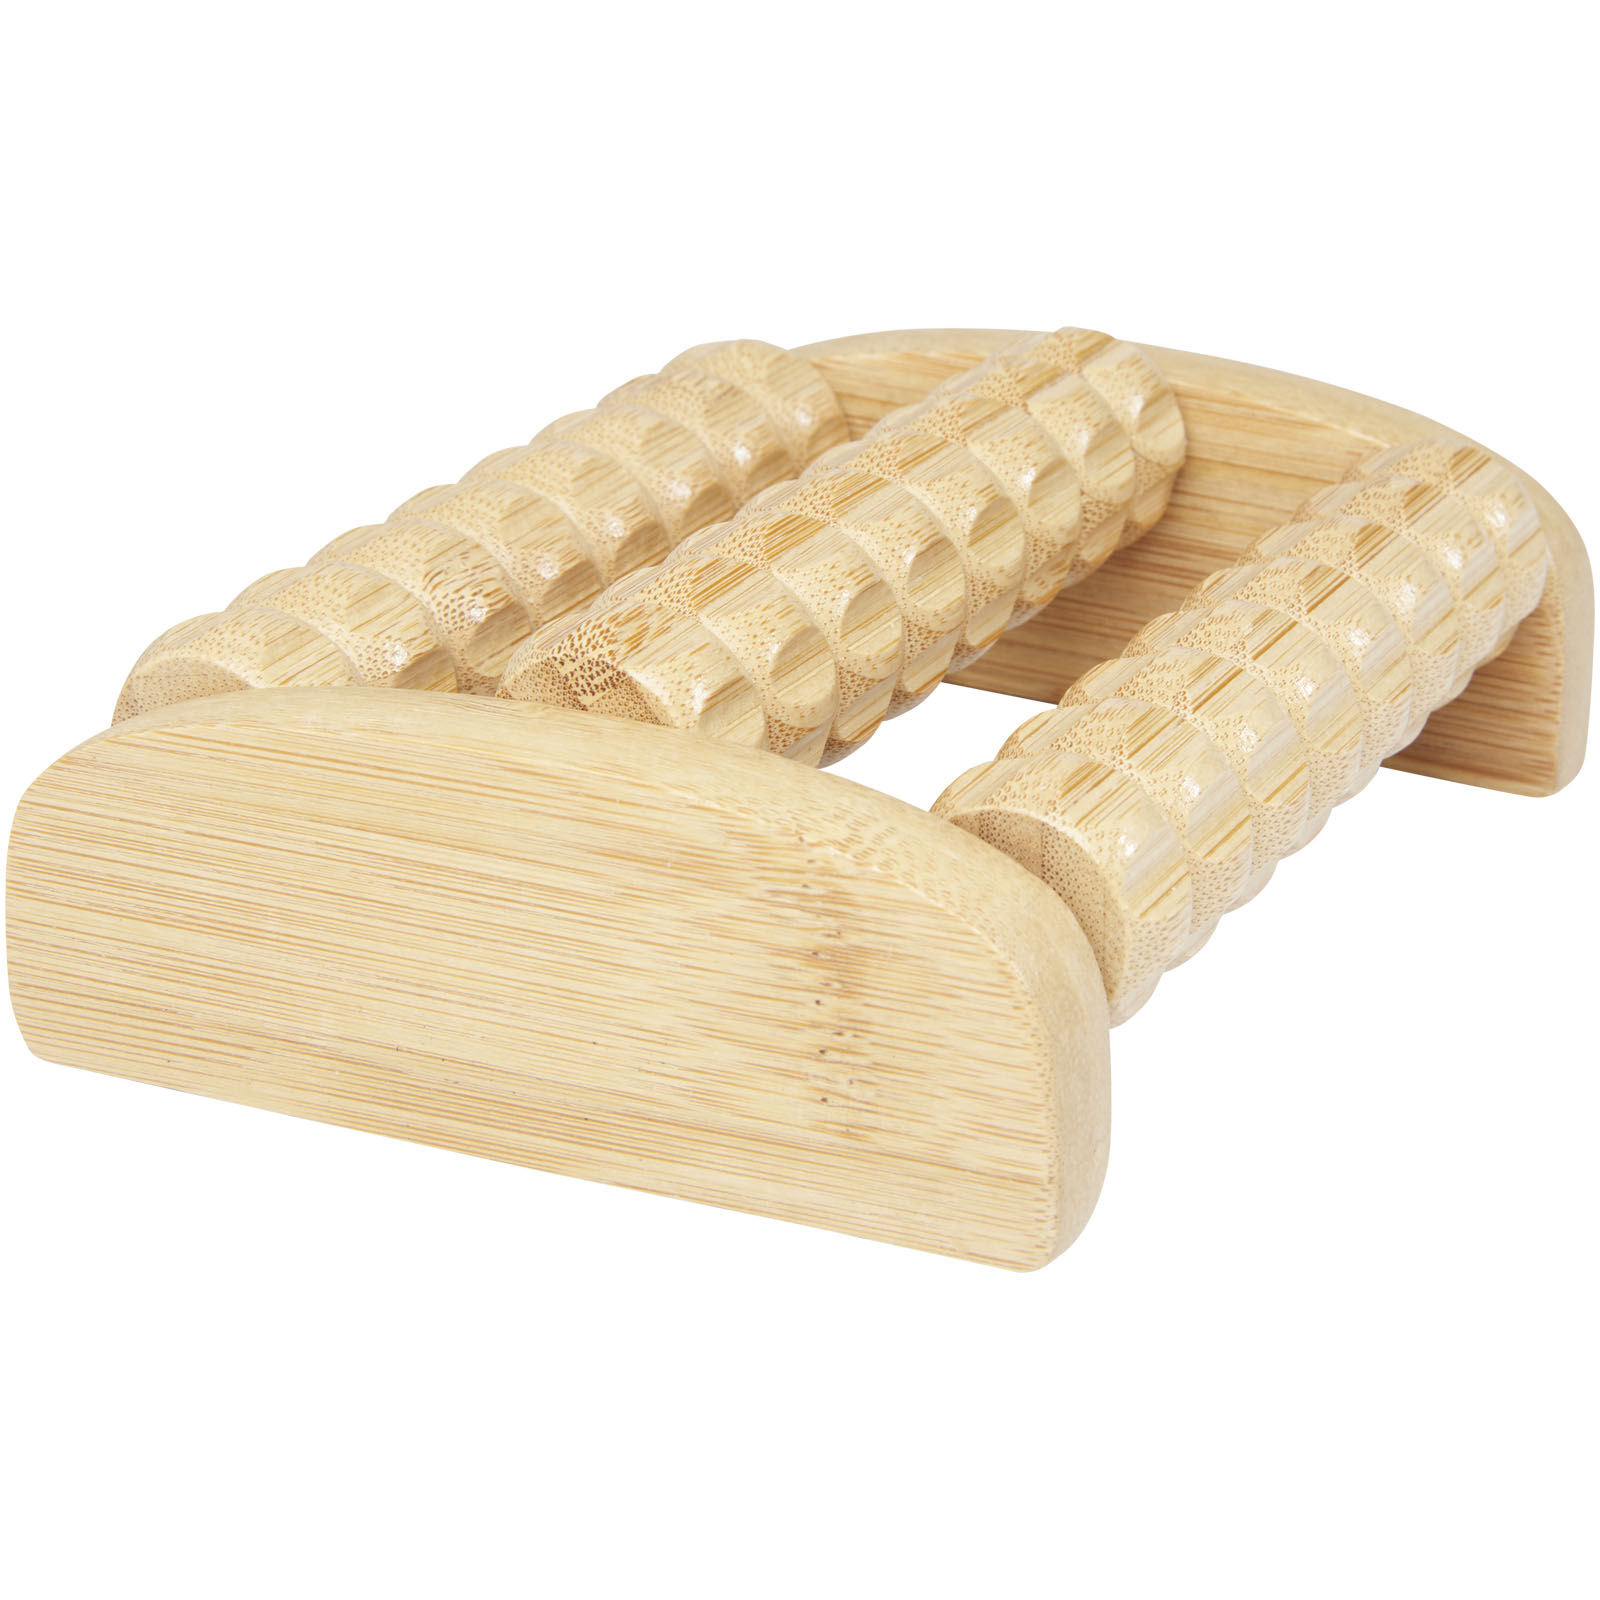 Advertising Personal Care - Venis bamboo foot massager - 2